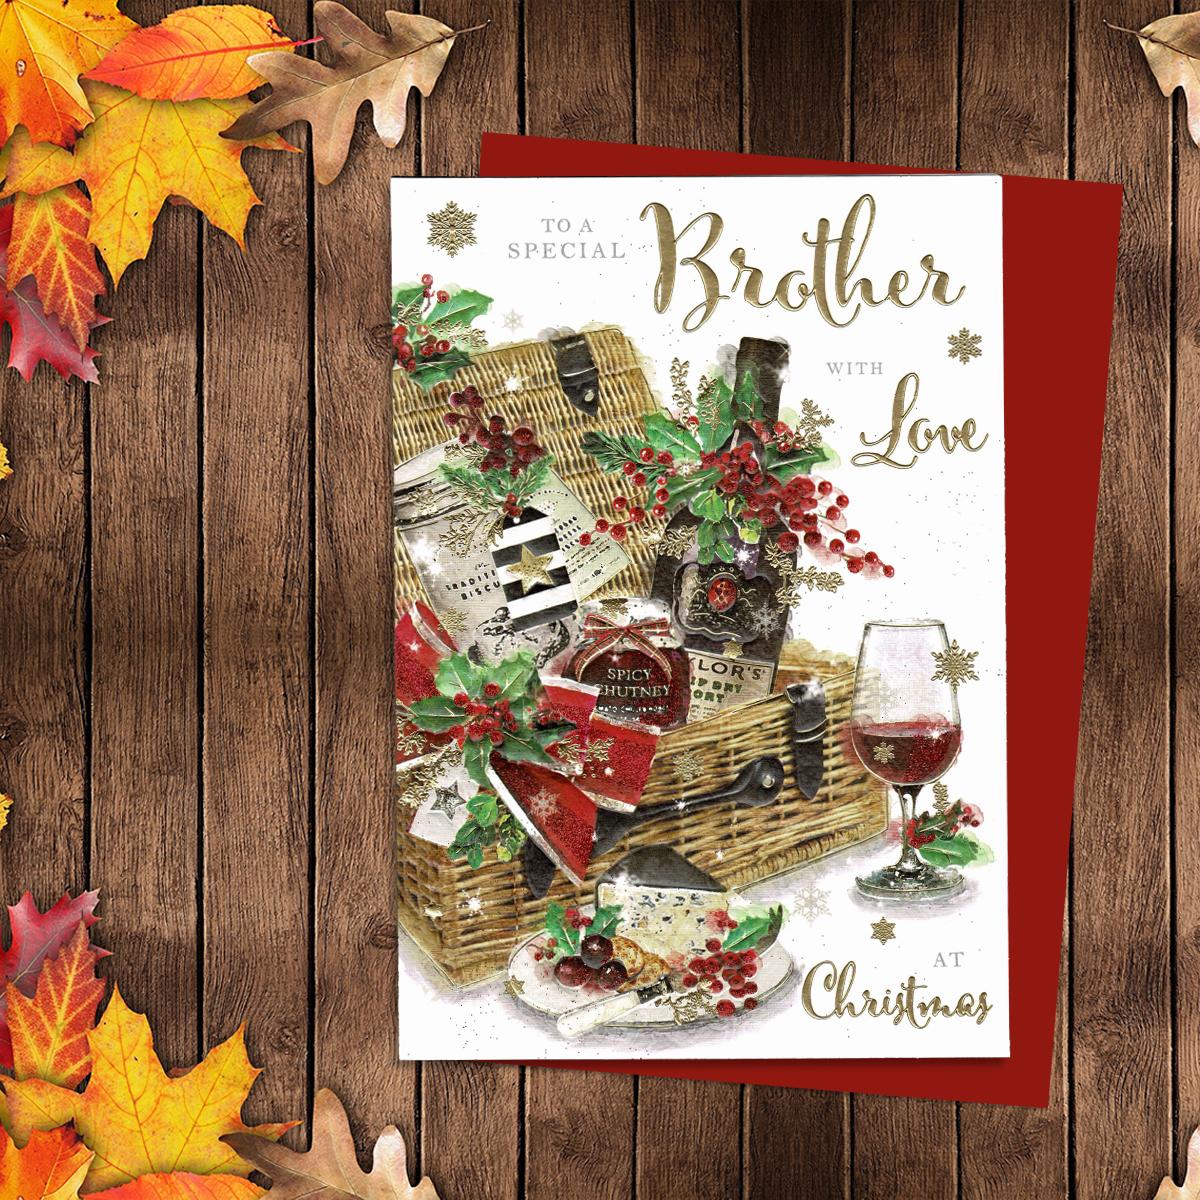 To A Special brother With Love At Christmas Featuring A Beautiful Festive Hamper , Port And Chutney. Finished With Gold Foil lettering, Red Glitter Details And Red Envelope